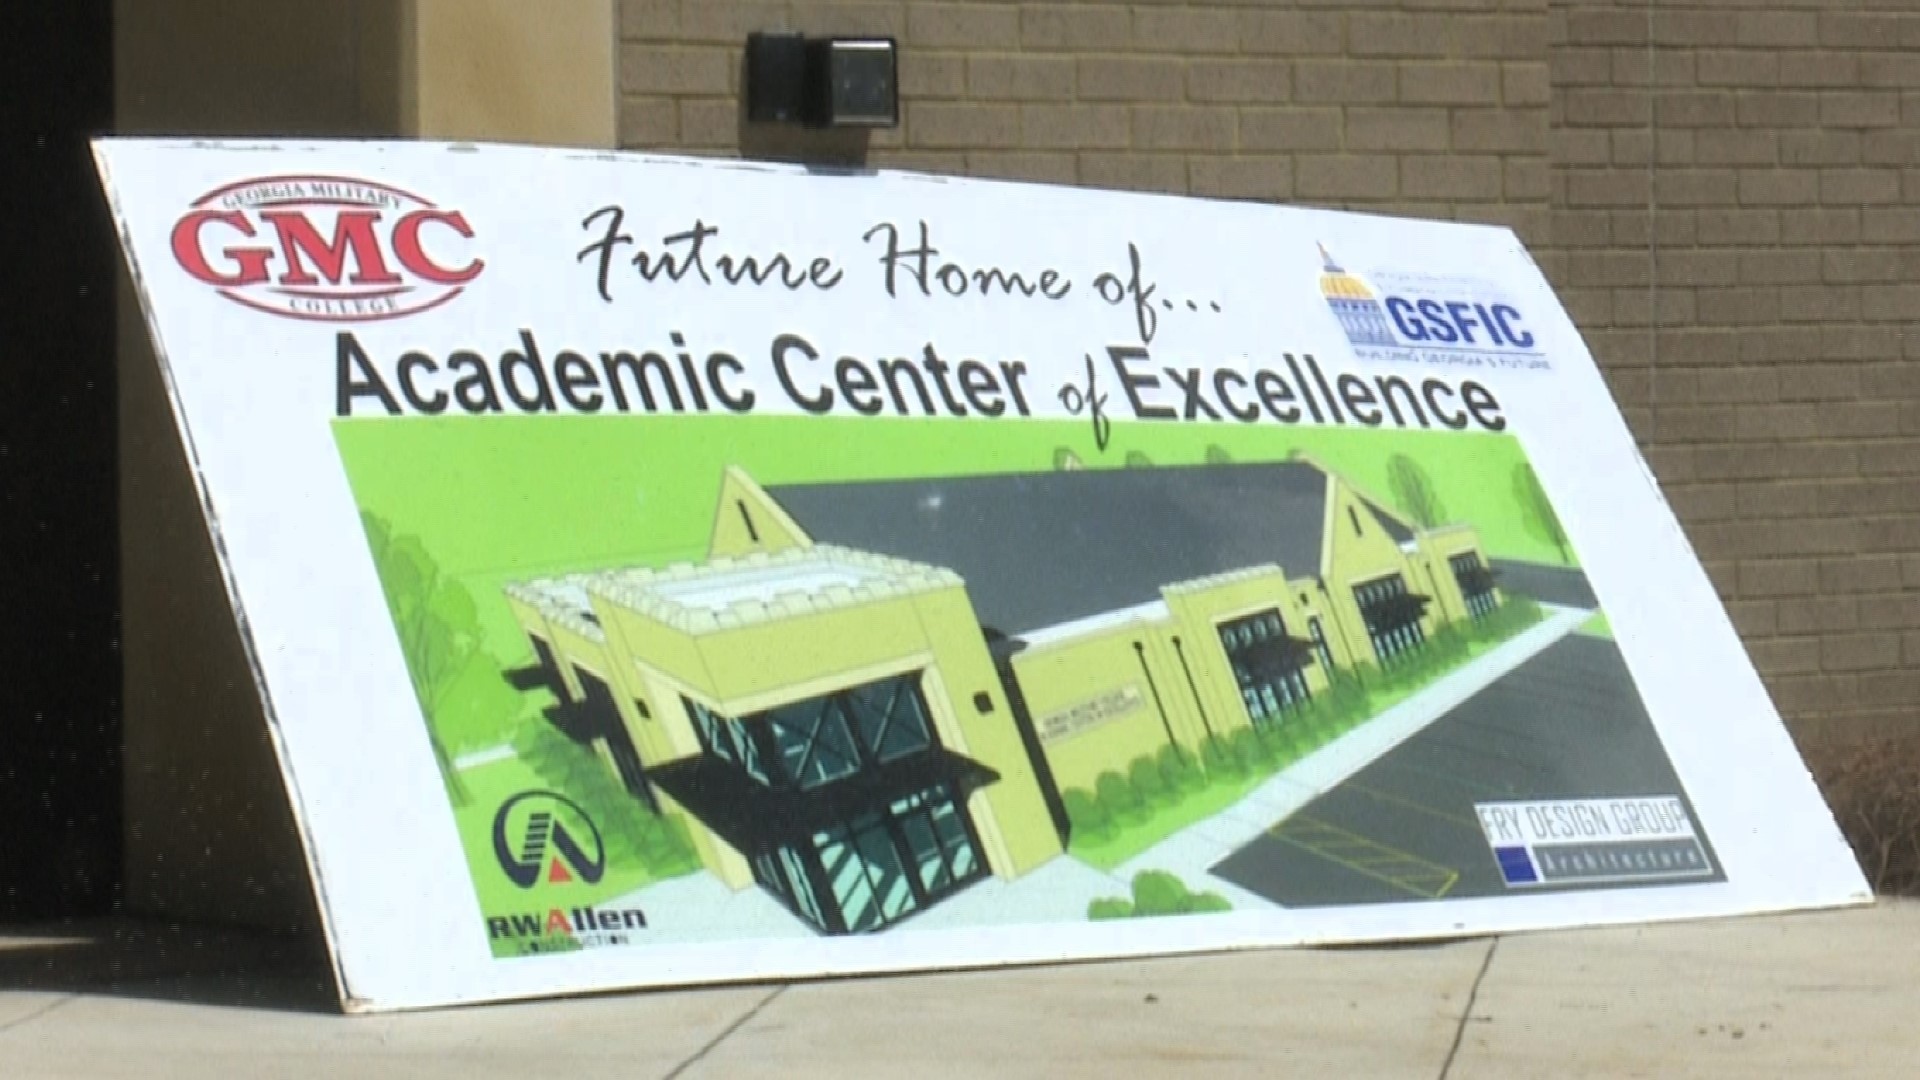 GMC says the ACE building will serve as a hub for academic affairs and administrations, education services, a student success center and more.